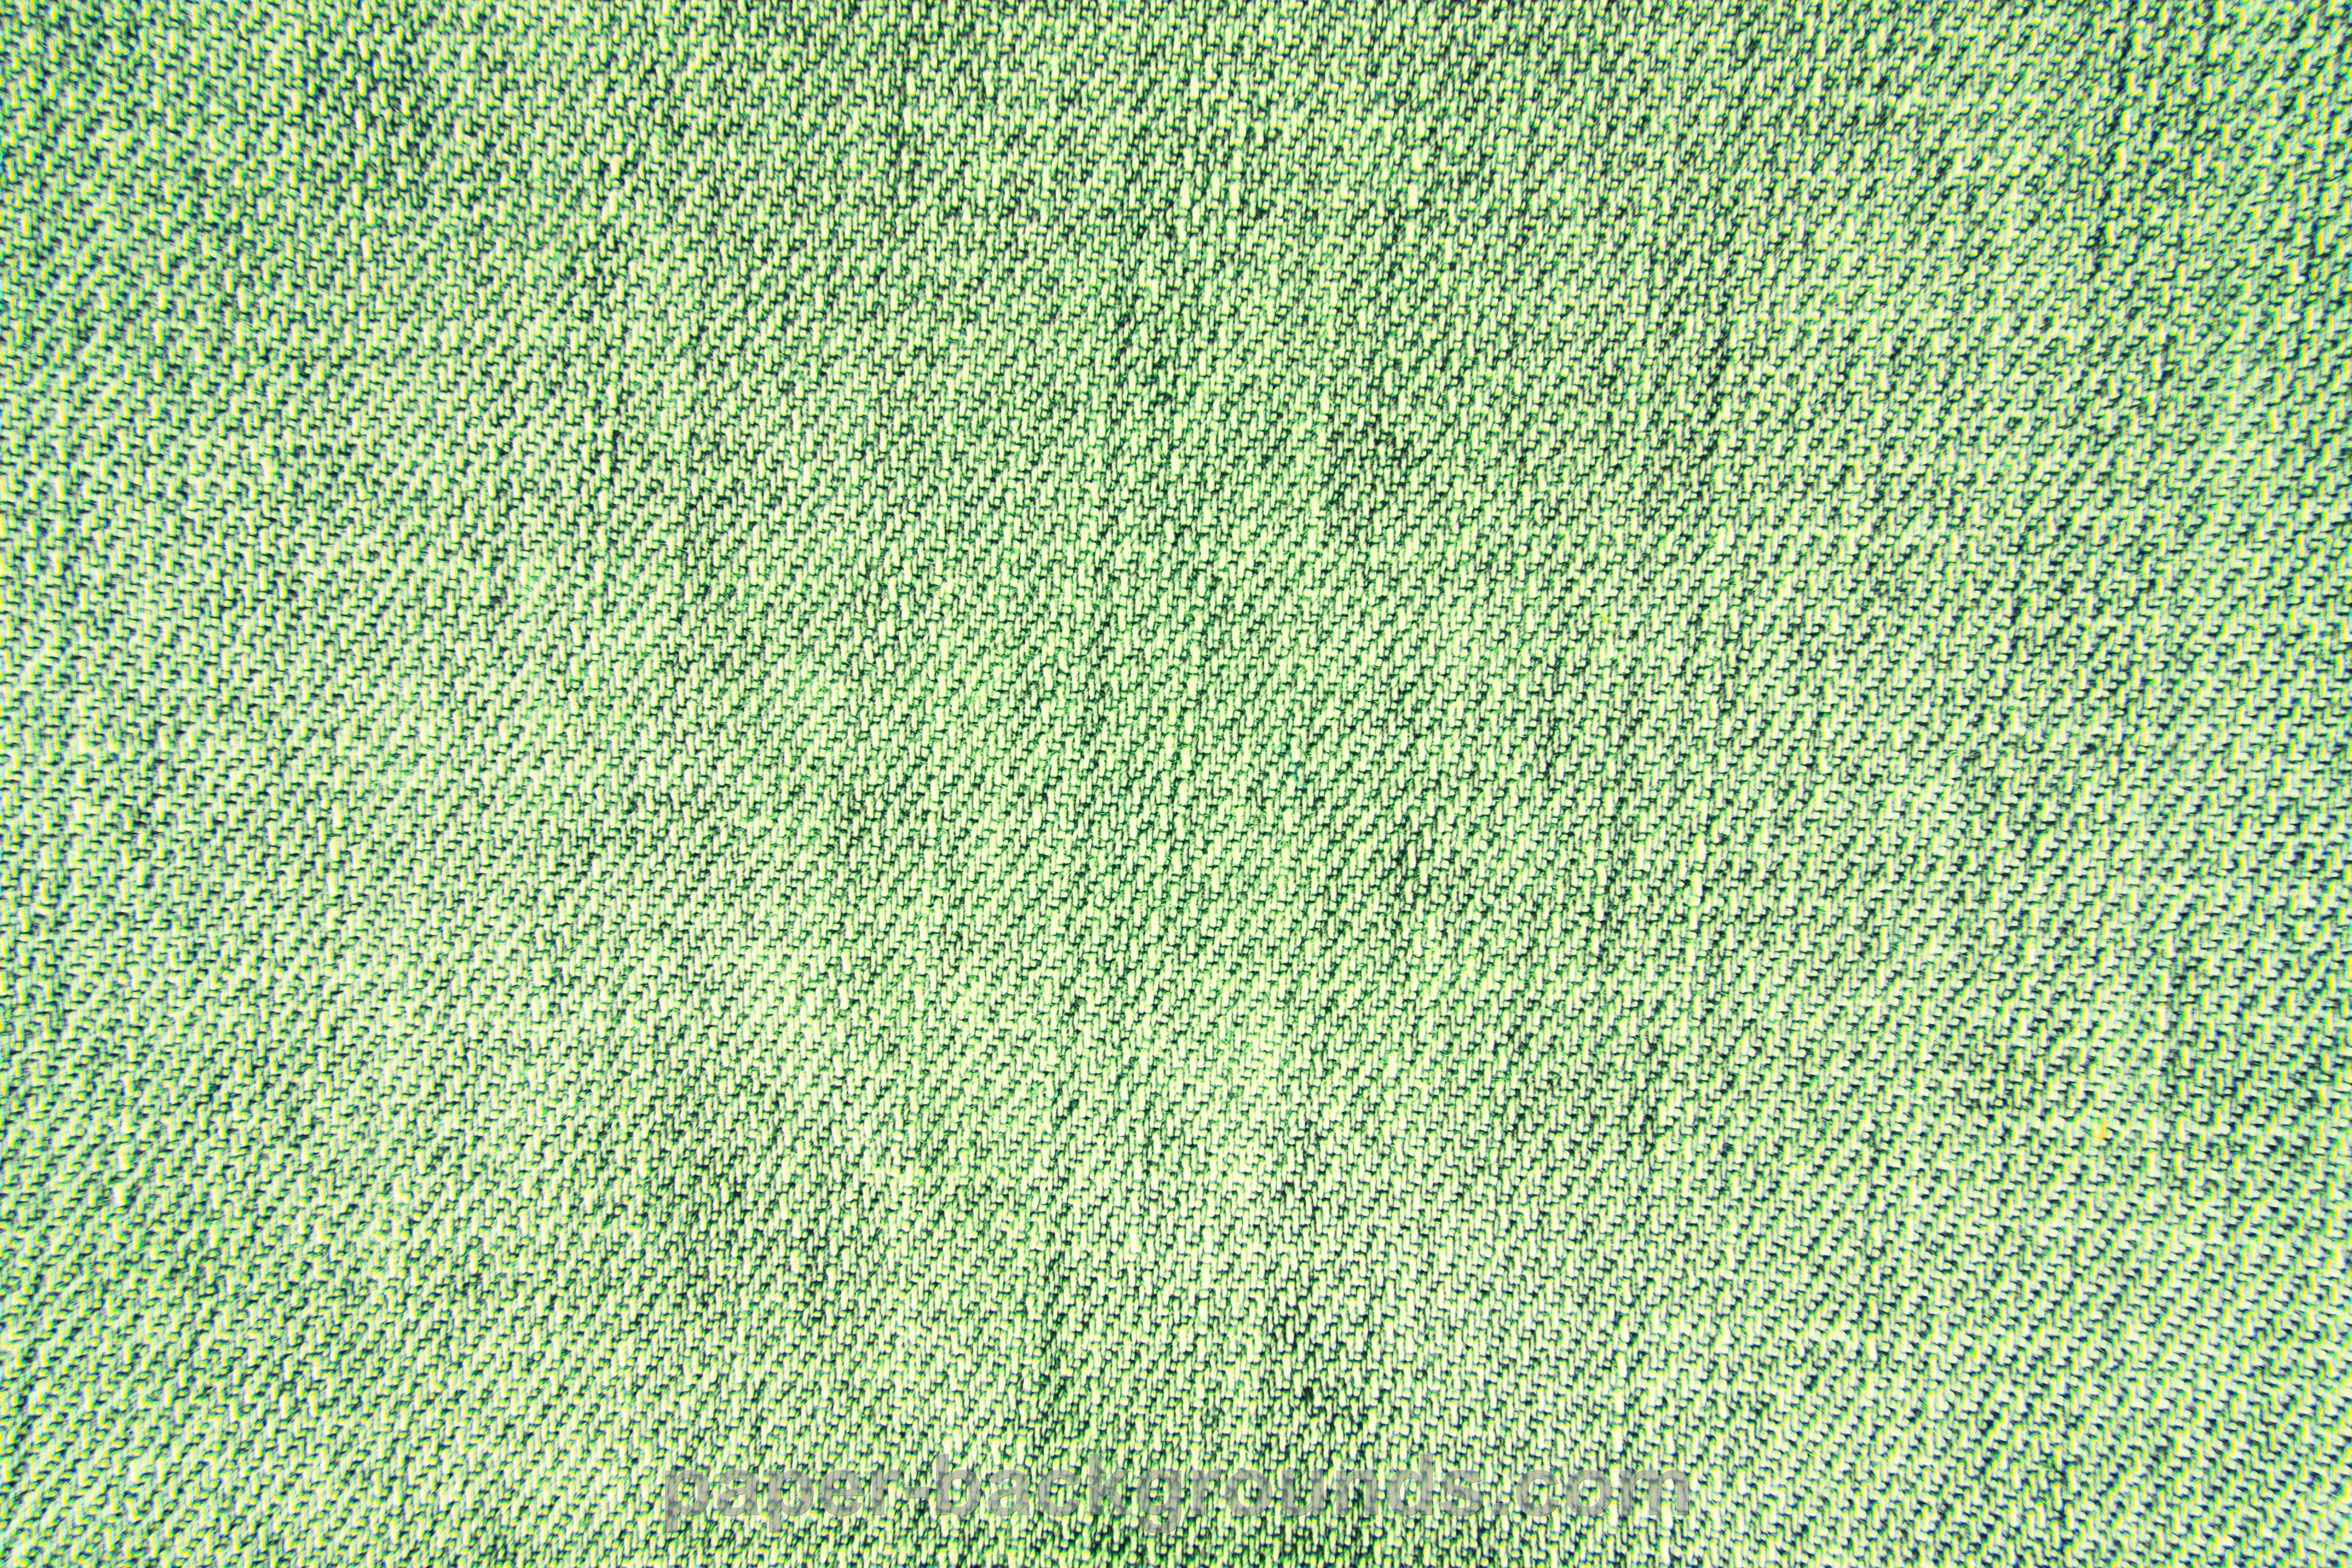 Paper Backgrounds | Green Vintage Fabric Texture Background High ...